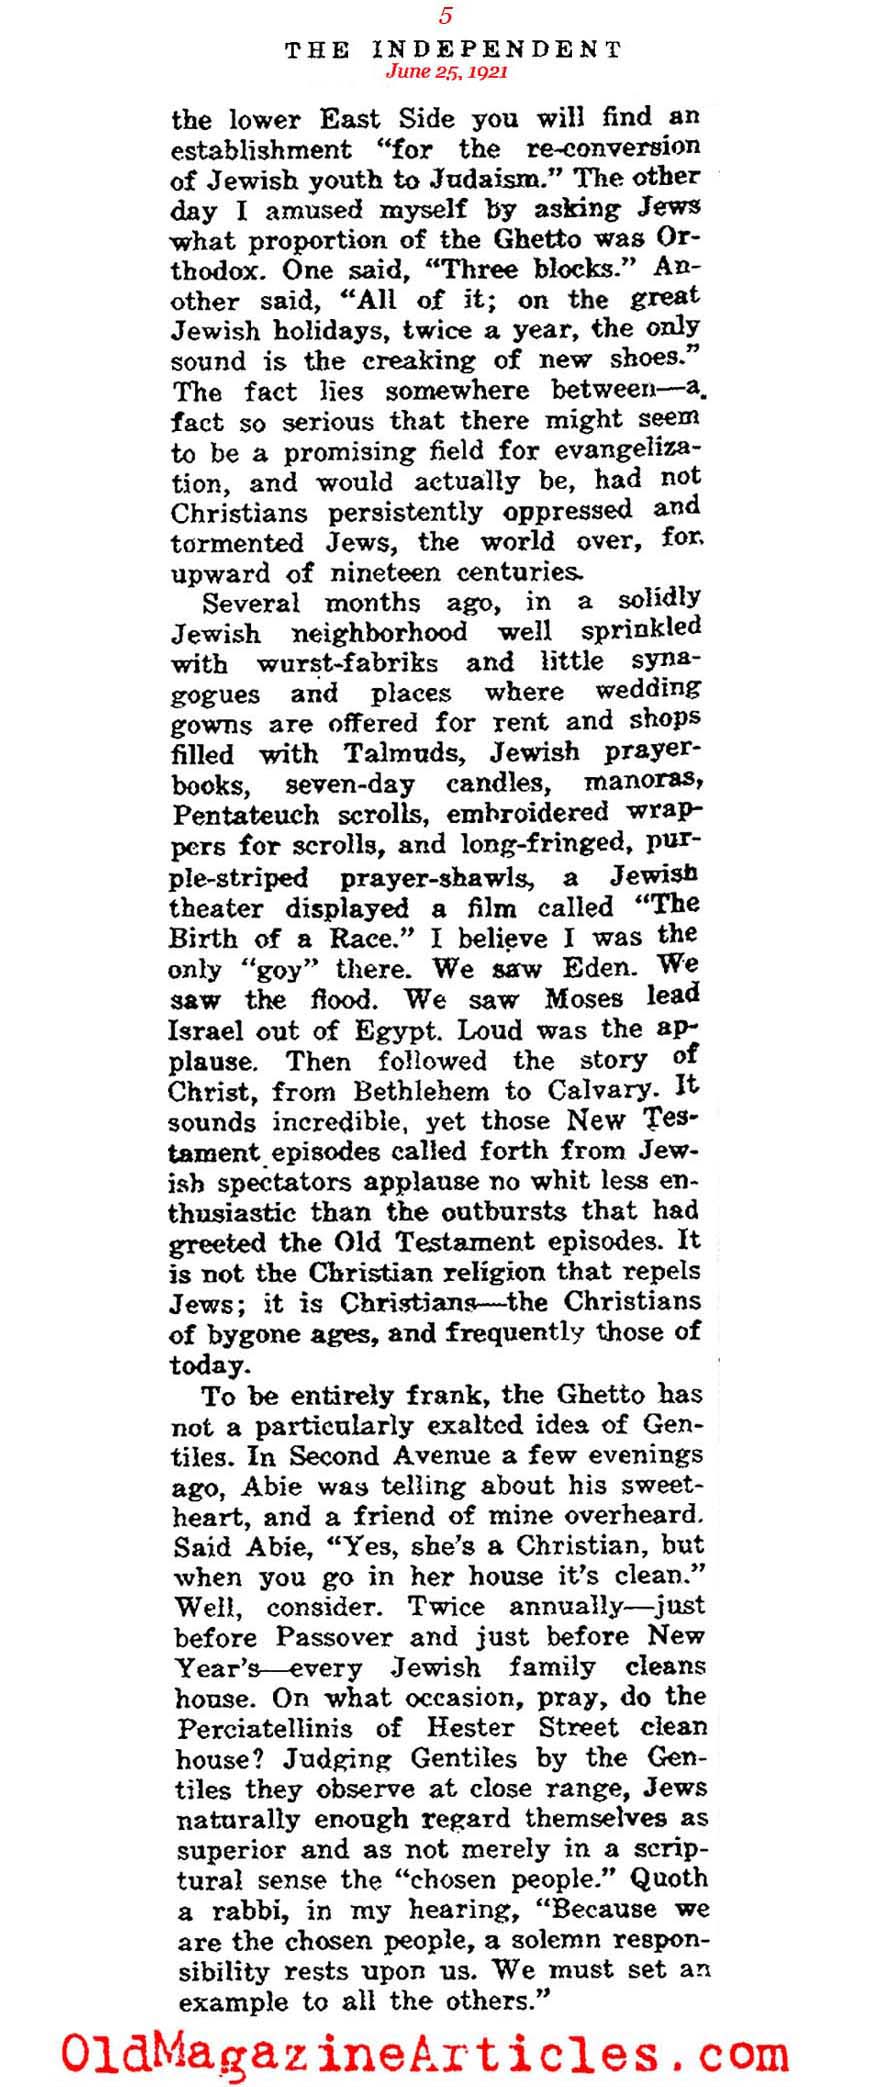 New York and the Real Jew (The Independent, 1921)